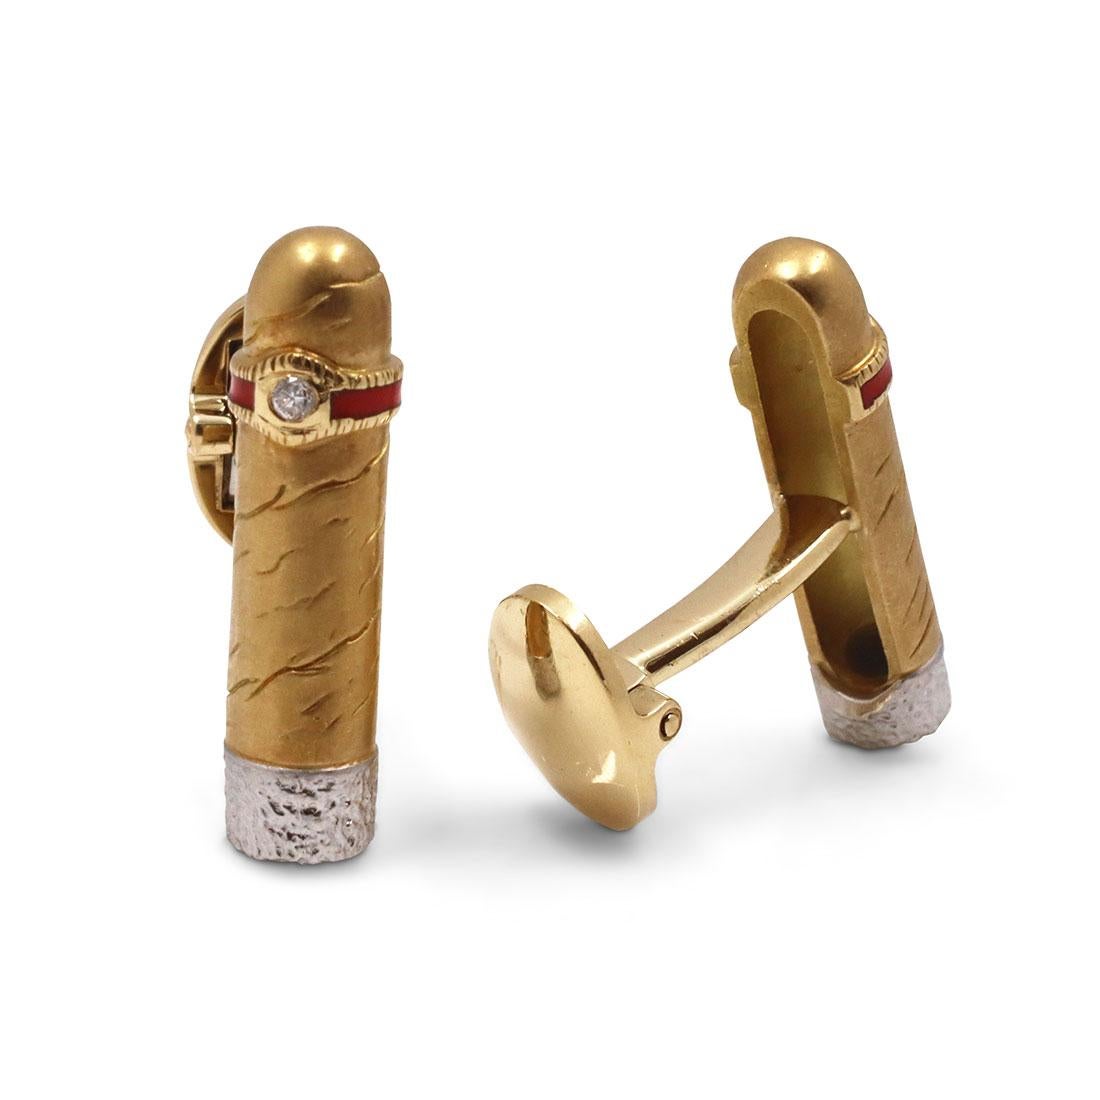 An authentic pair of cufflinks crafted in 18 karat yellow gold and platinum. These striking cufflinks designed as cigars feature a single round diamond centered in the cigar band and a platinum tip that resembles ashes. Stamped PLAT, 750. The